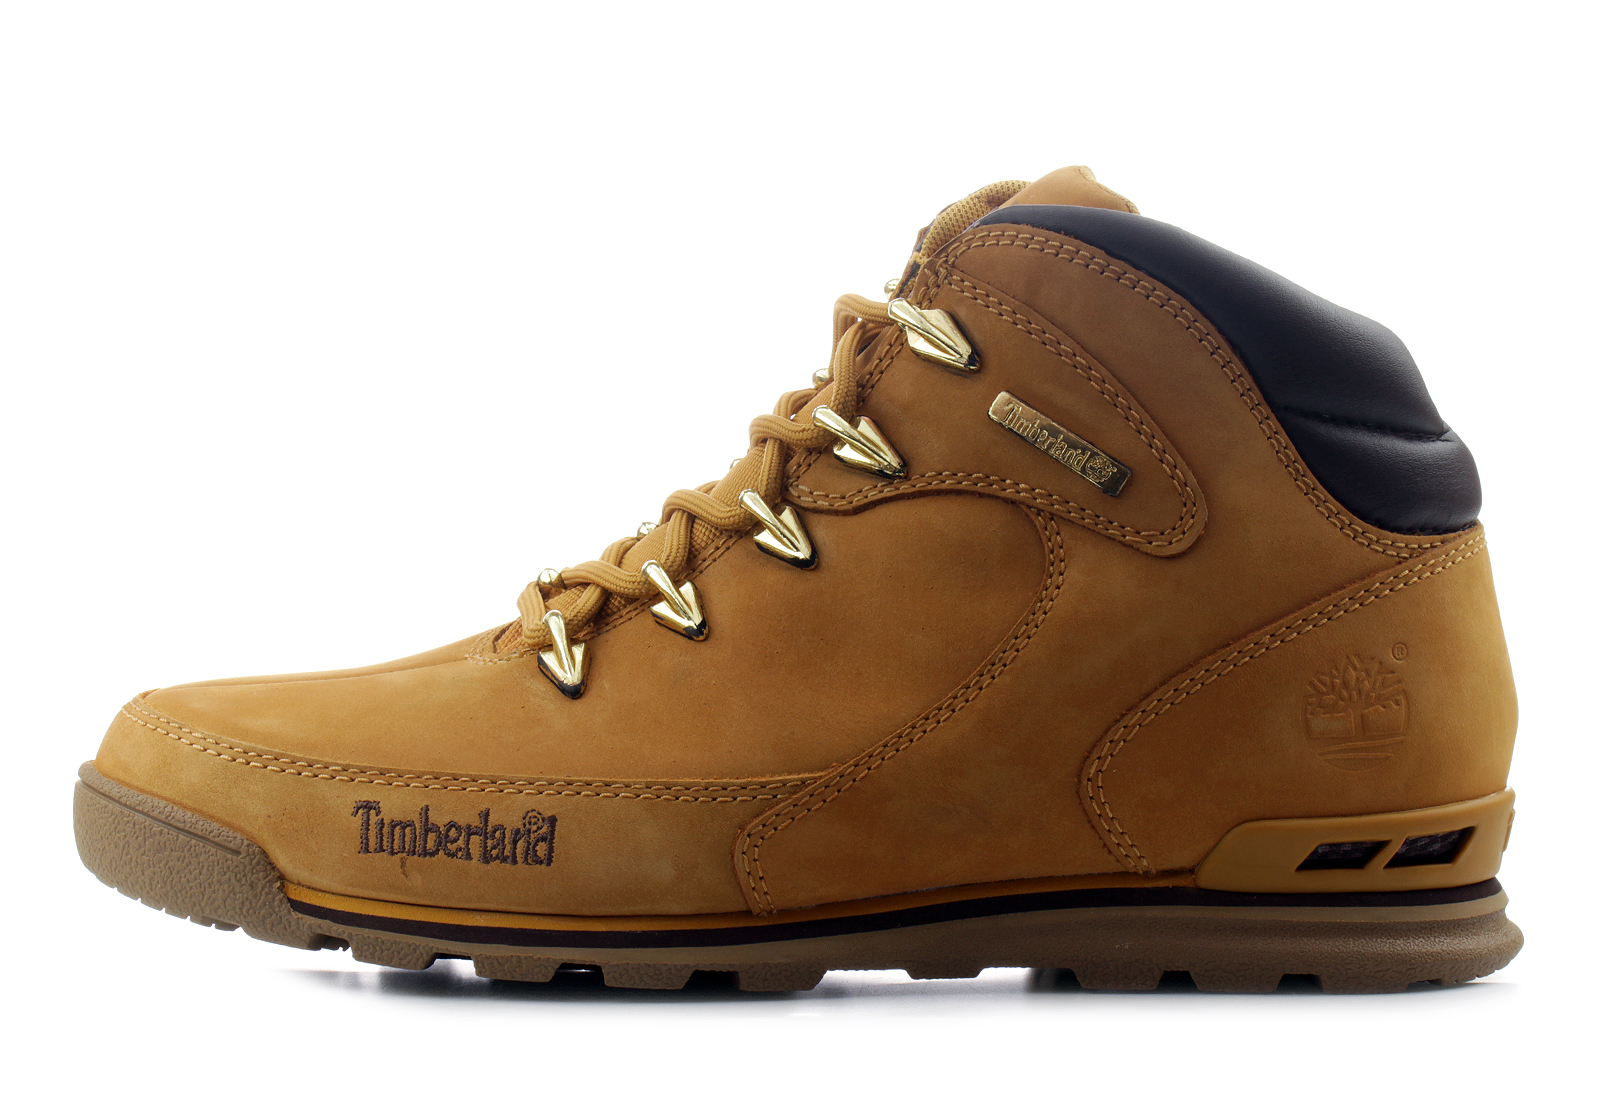 Timberland Boots - Euro Rock - 6164R-WHE - Online shop for sneakers ...